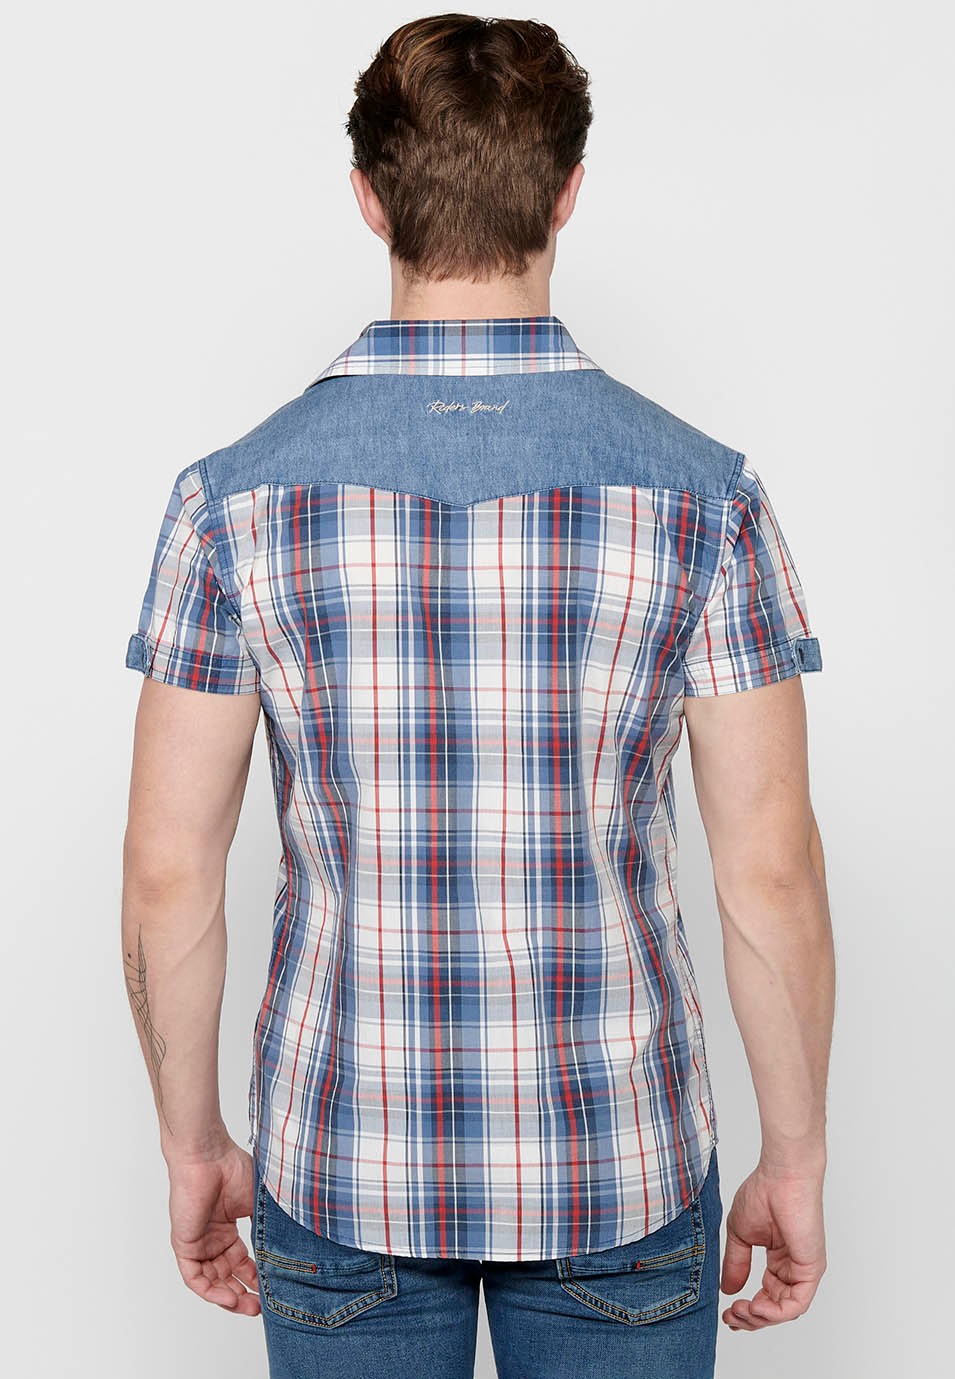 Short-sleeved cotton shirt with turn-up finish with button front closure and front pockets with flaps with a blue checkered print for men 8